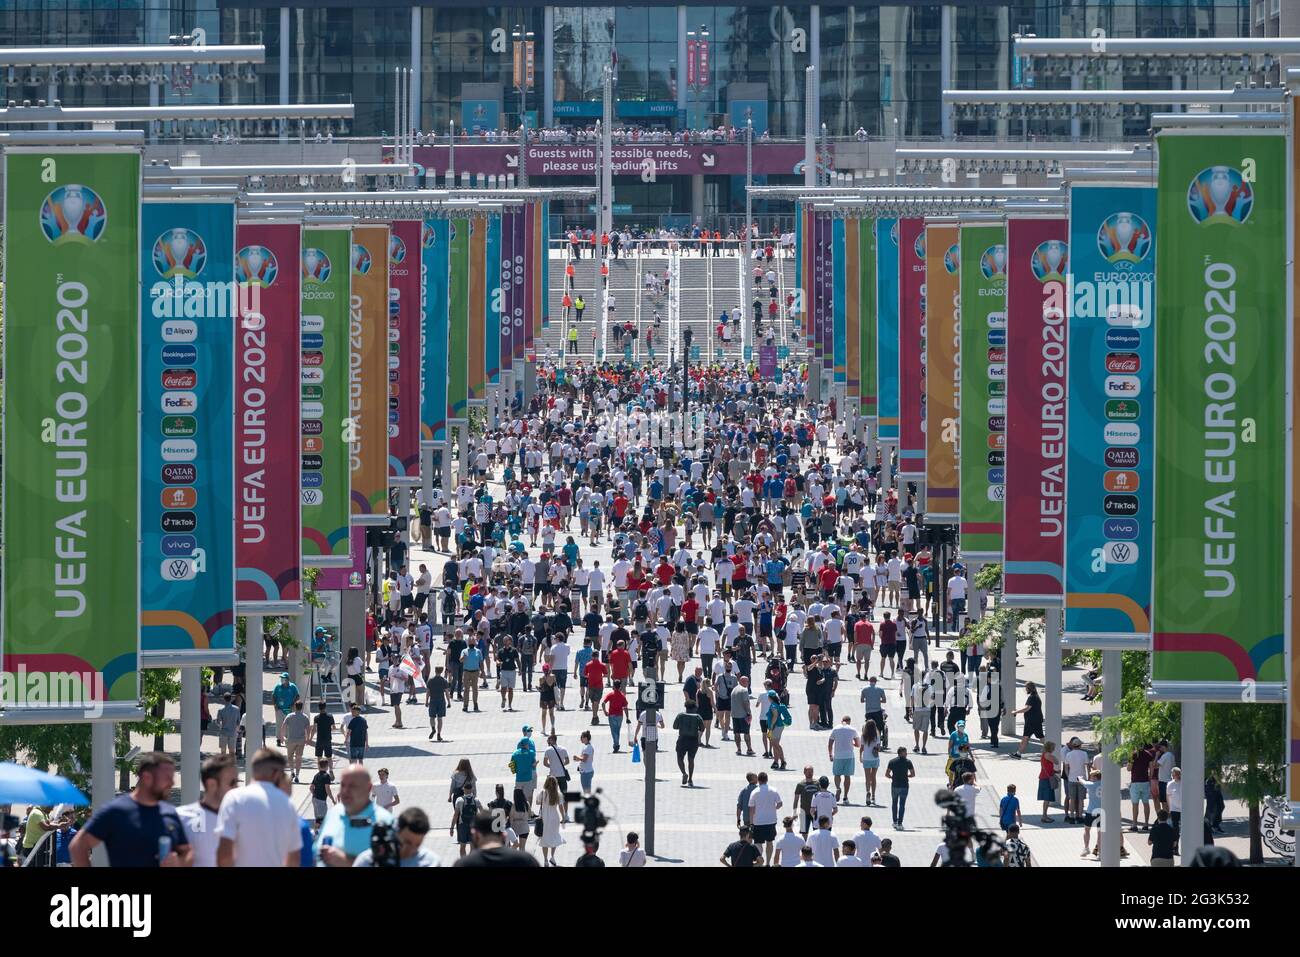 Euro 2020: Fans arrive at Wembley in a festive mood ready for England vs Croatia match, European Championships Group D. London, UK. Stock Photo